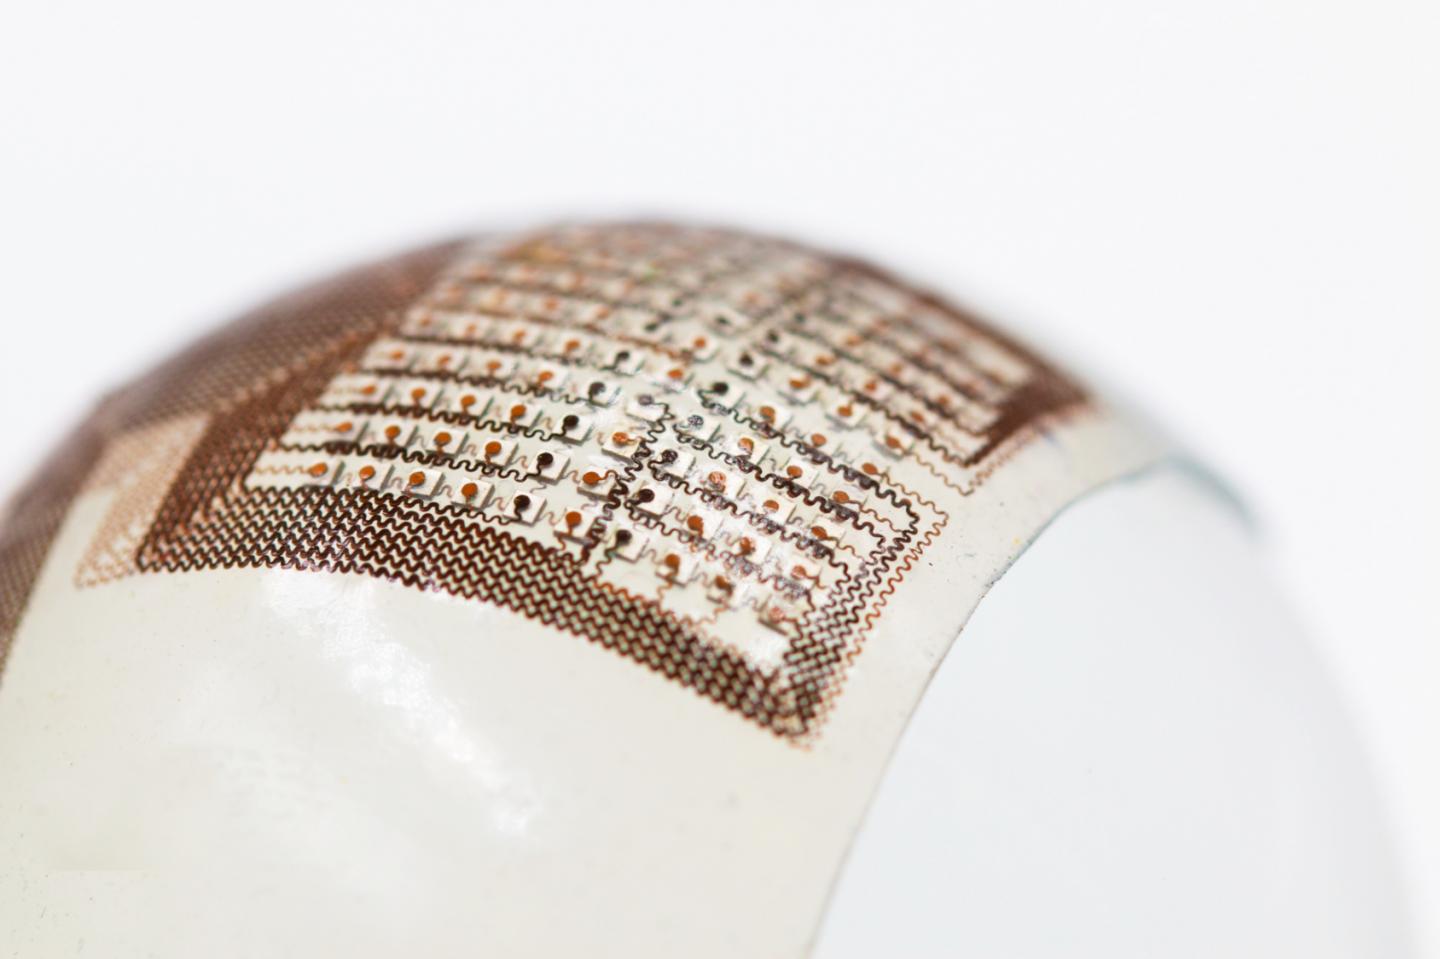 Flexible Ultrasound Patch on a Sphere